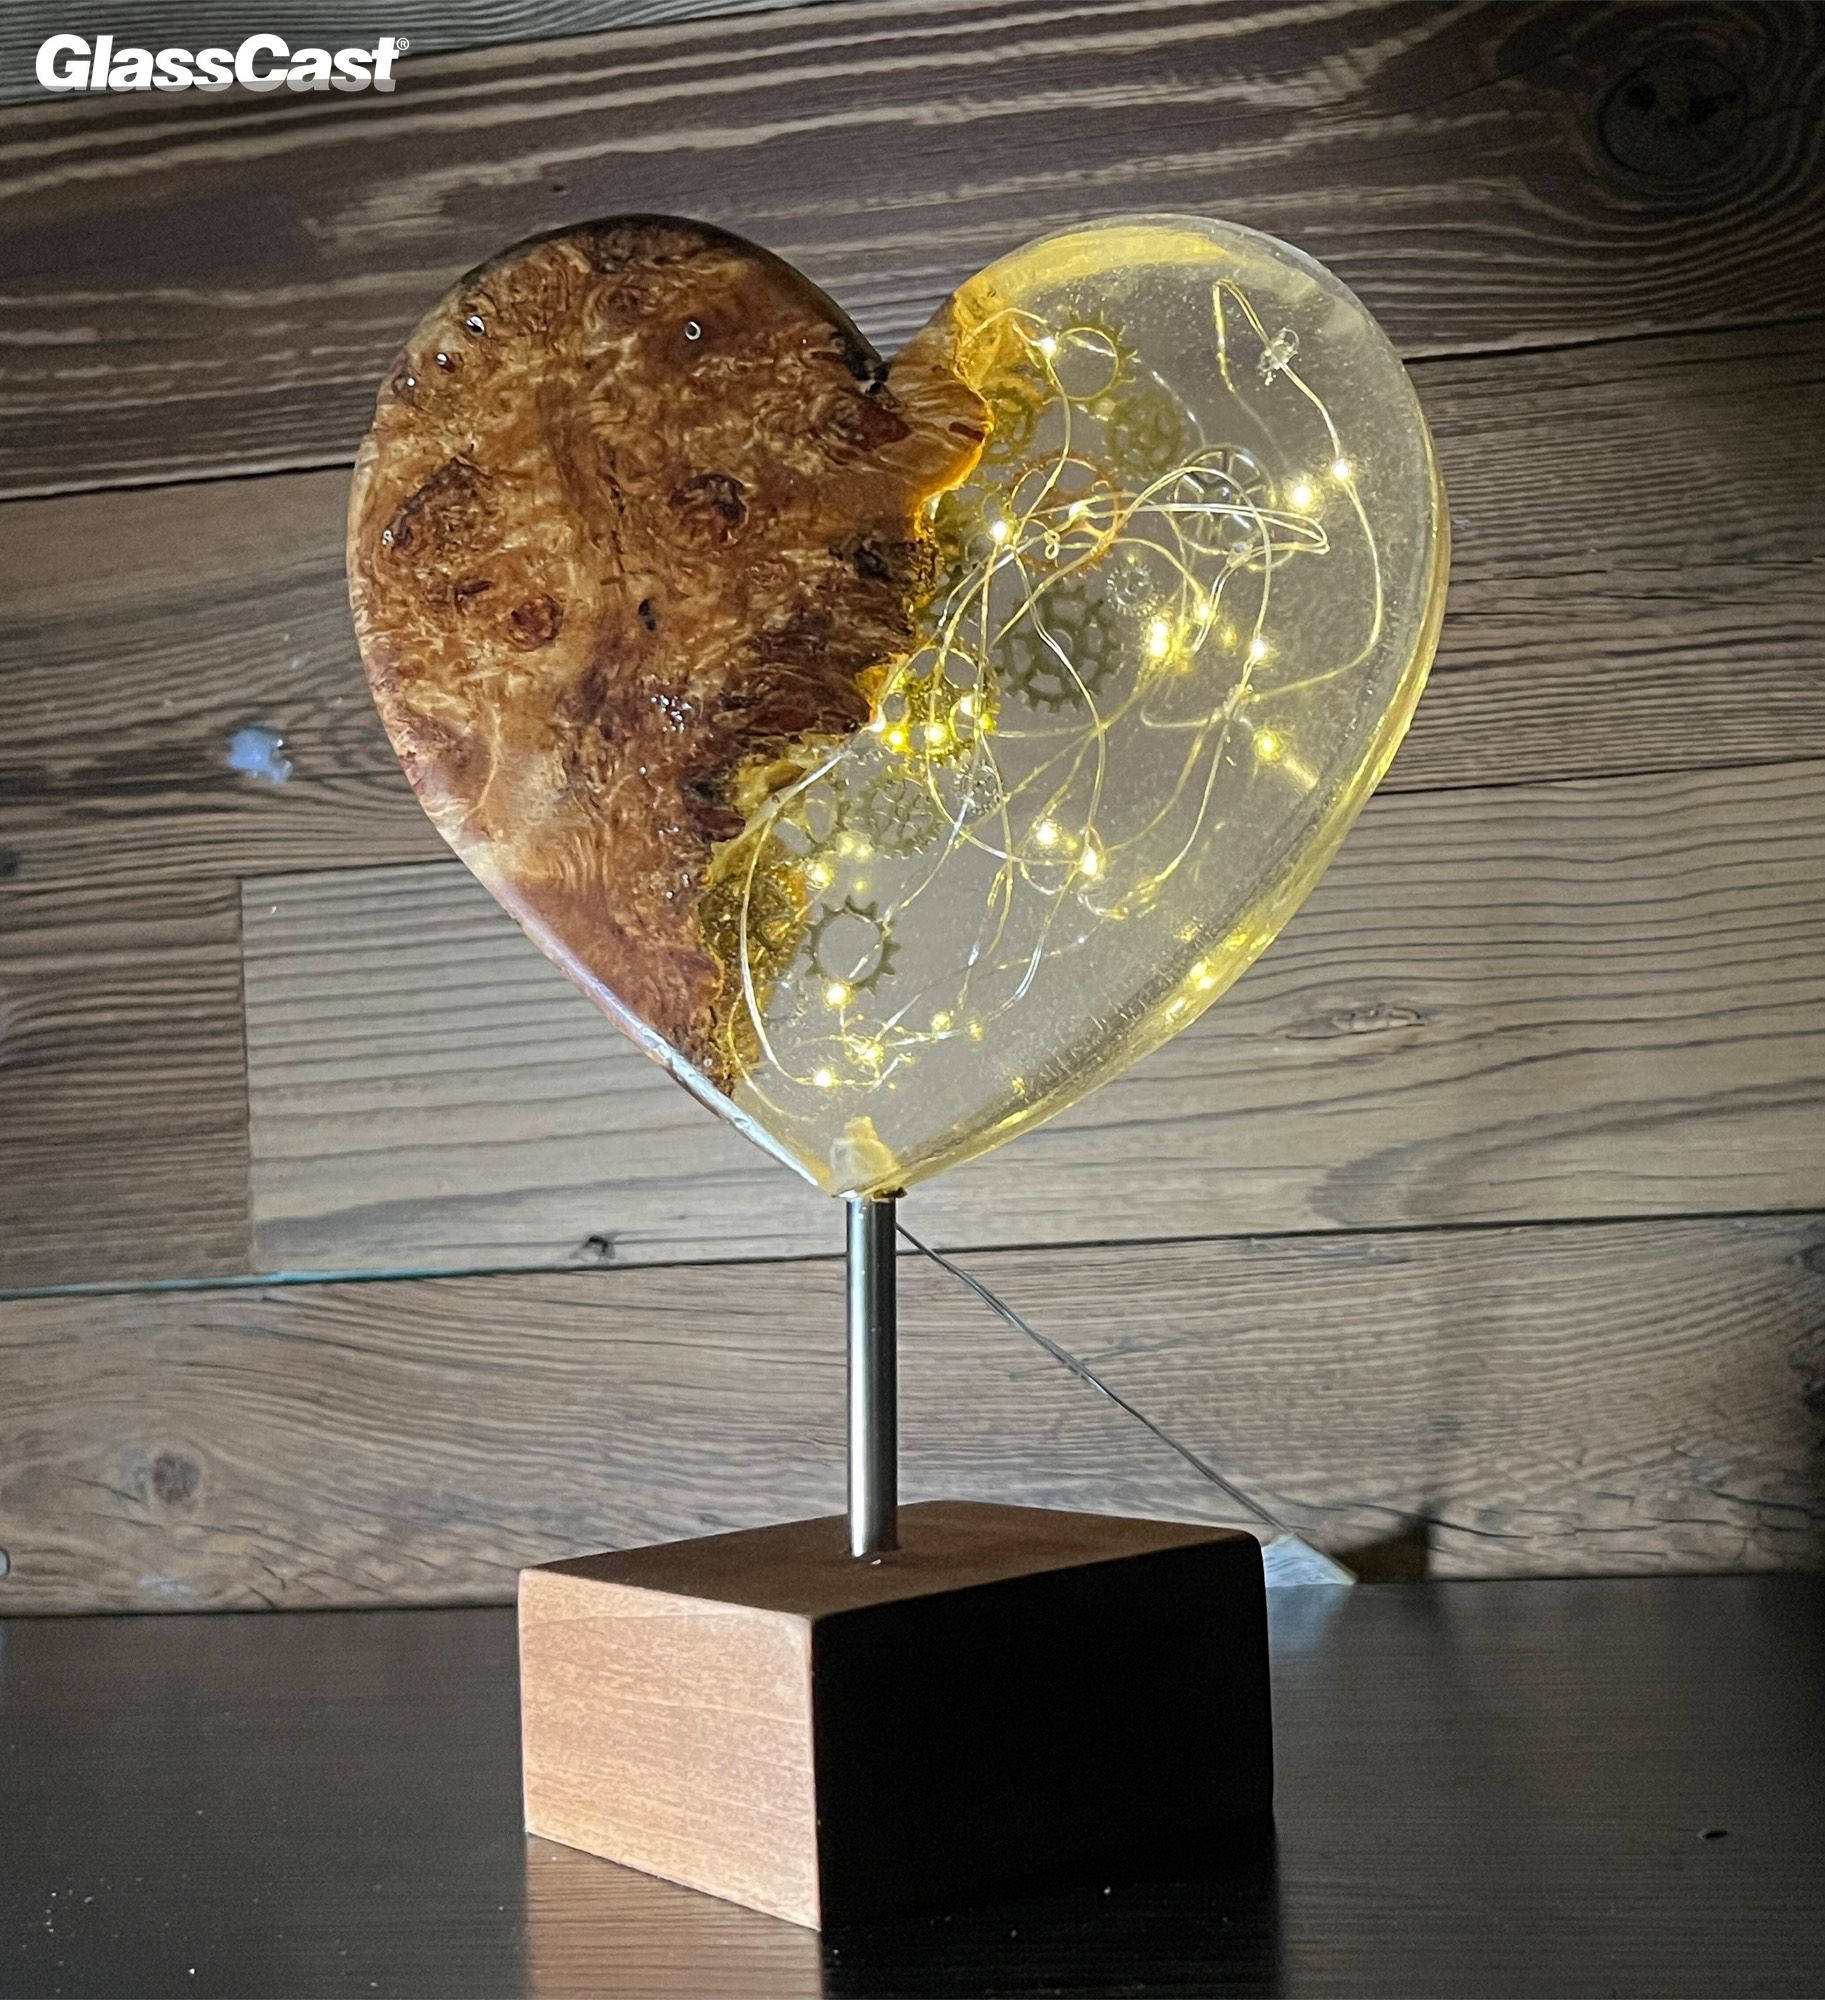 Wood and Resin Lamp Collection - GlassCast